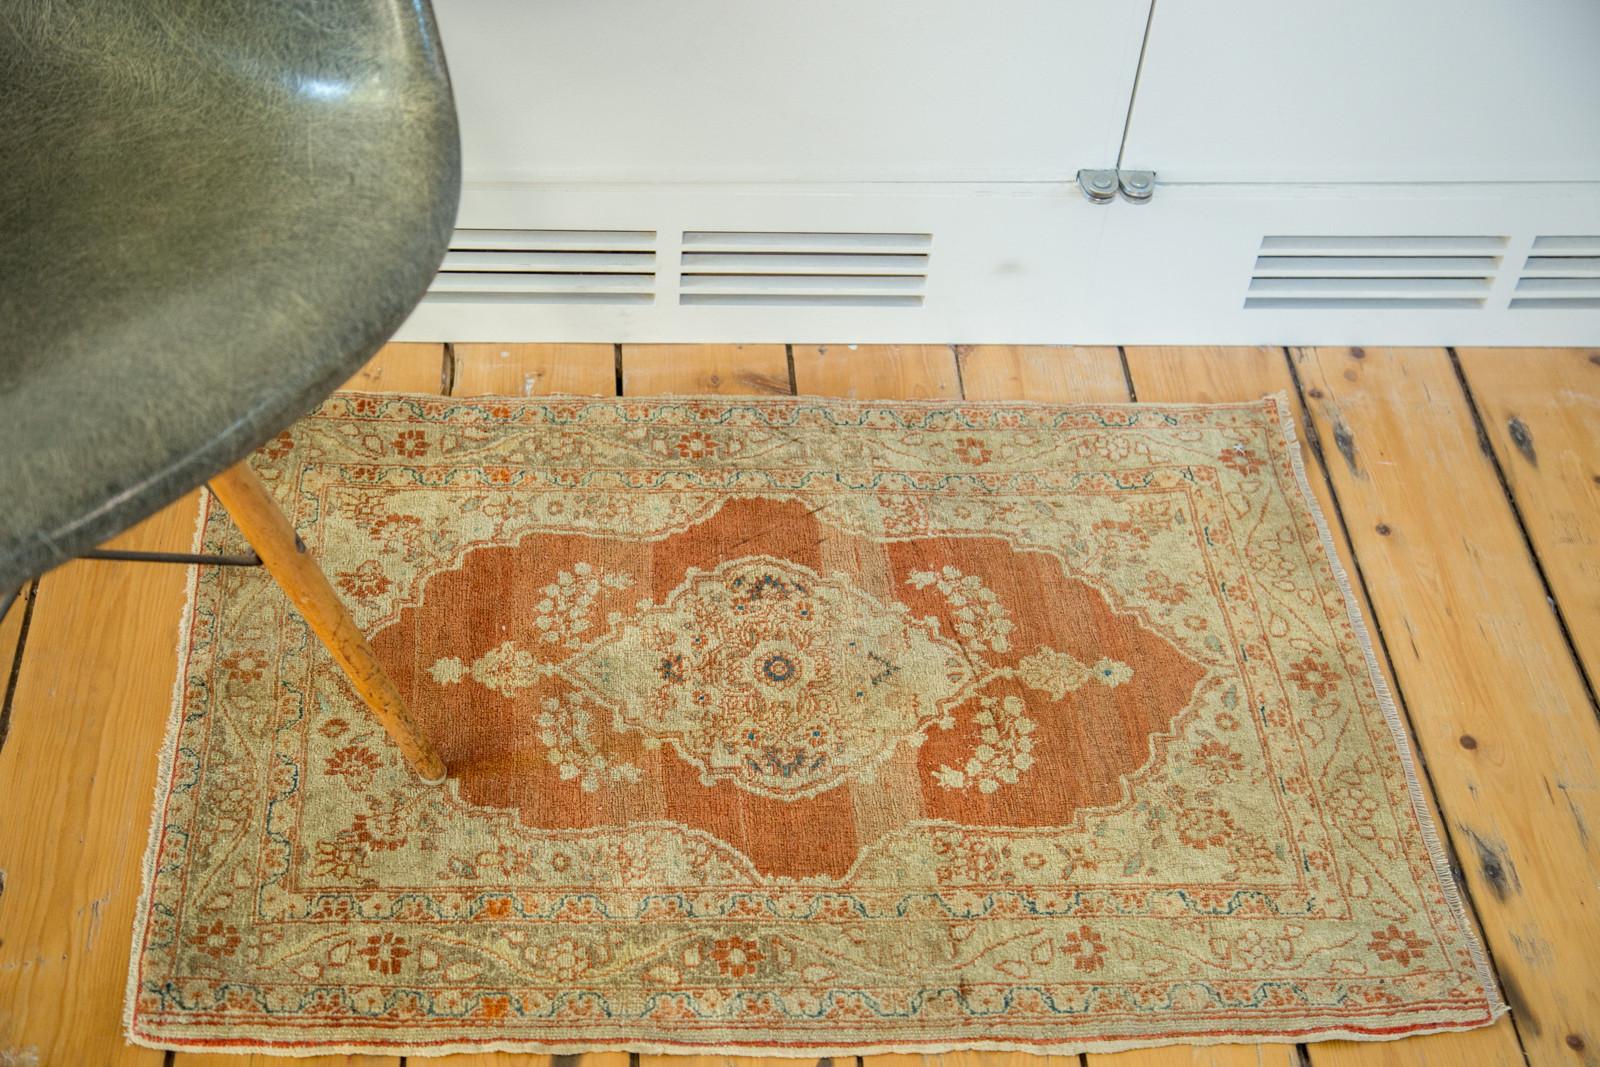 Intricate antique rug mat circa 1910 with ornate center medallion. Colors in this rug include shades of gold, bronze, and madder root red. Unique floral design throughout. Many years of enjoyment to come! Recently professionally cleaned, ready for